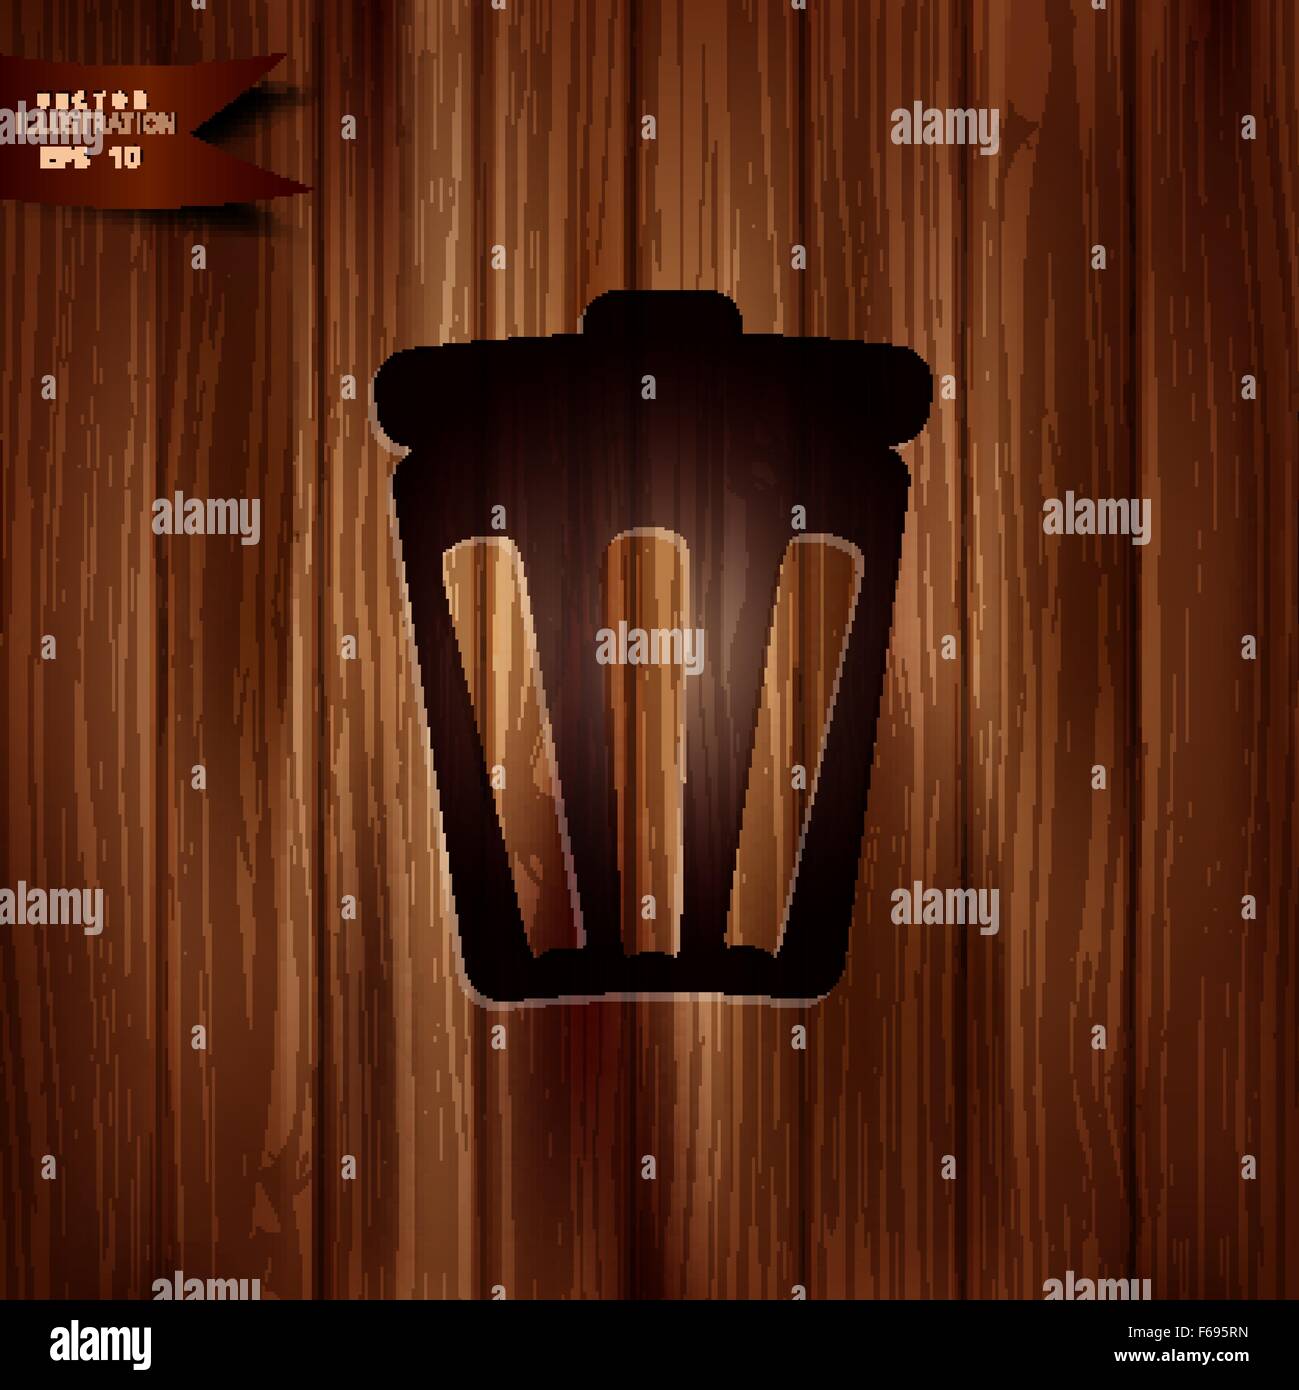 Trash can icon. Recycle symbol. Wooden background Stock Vector